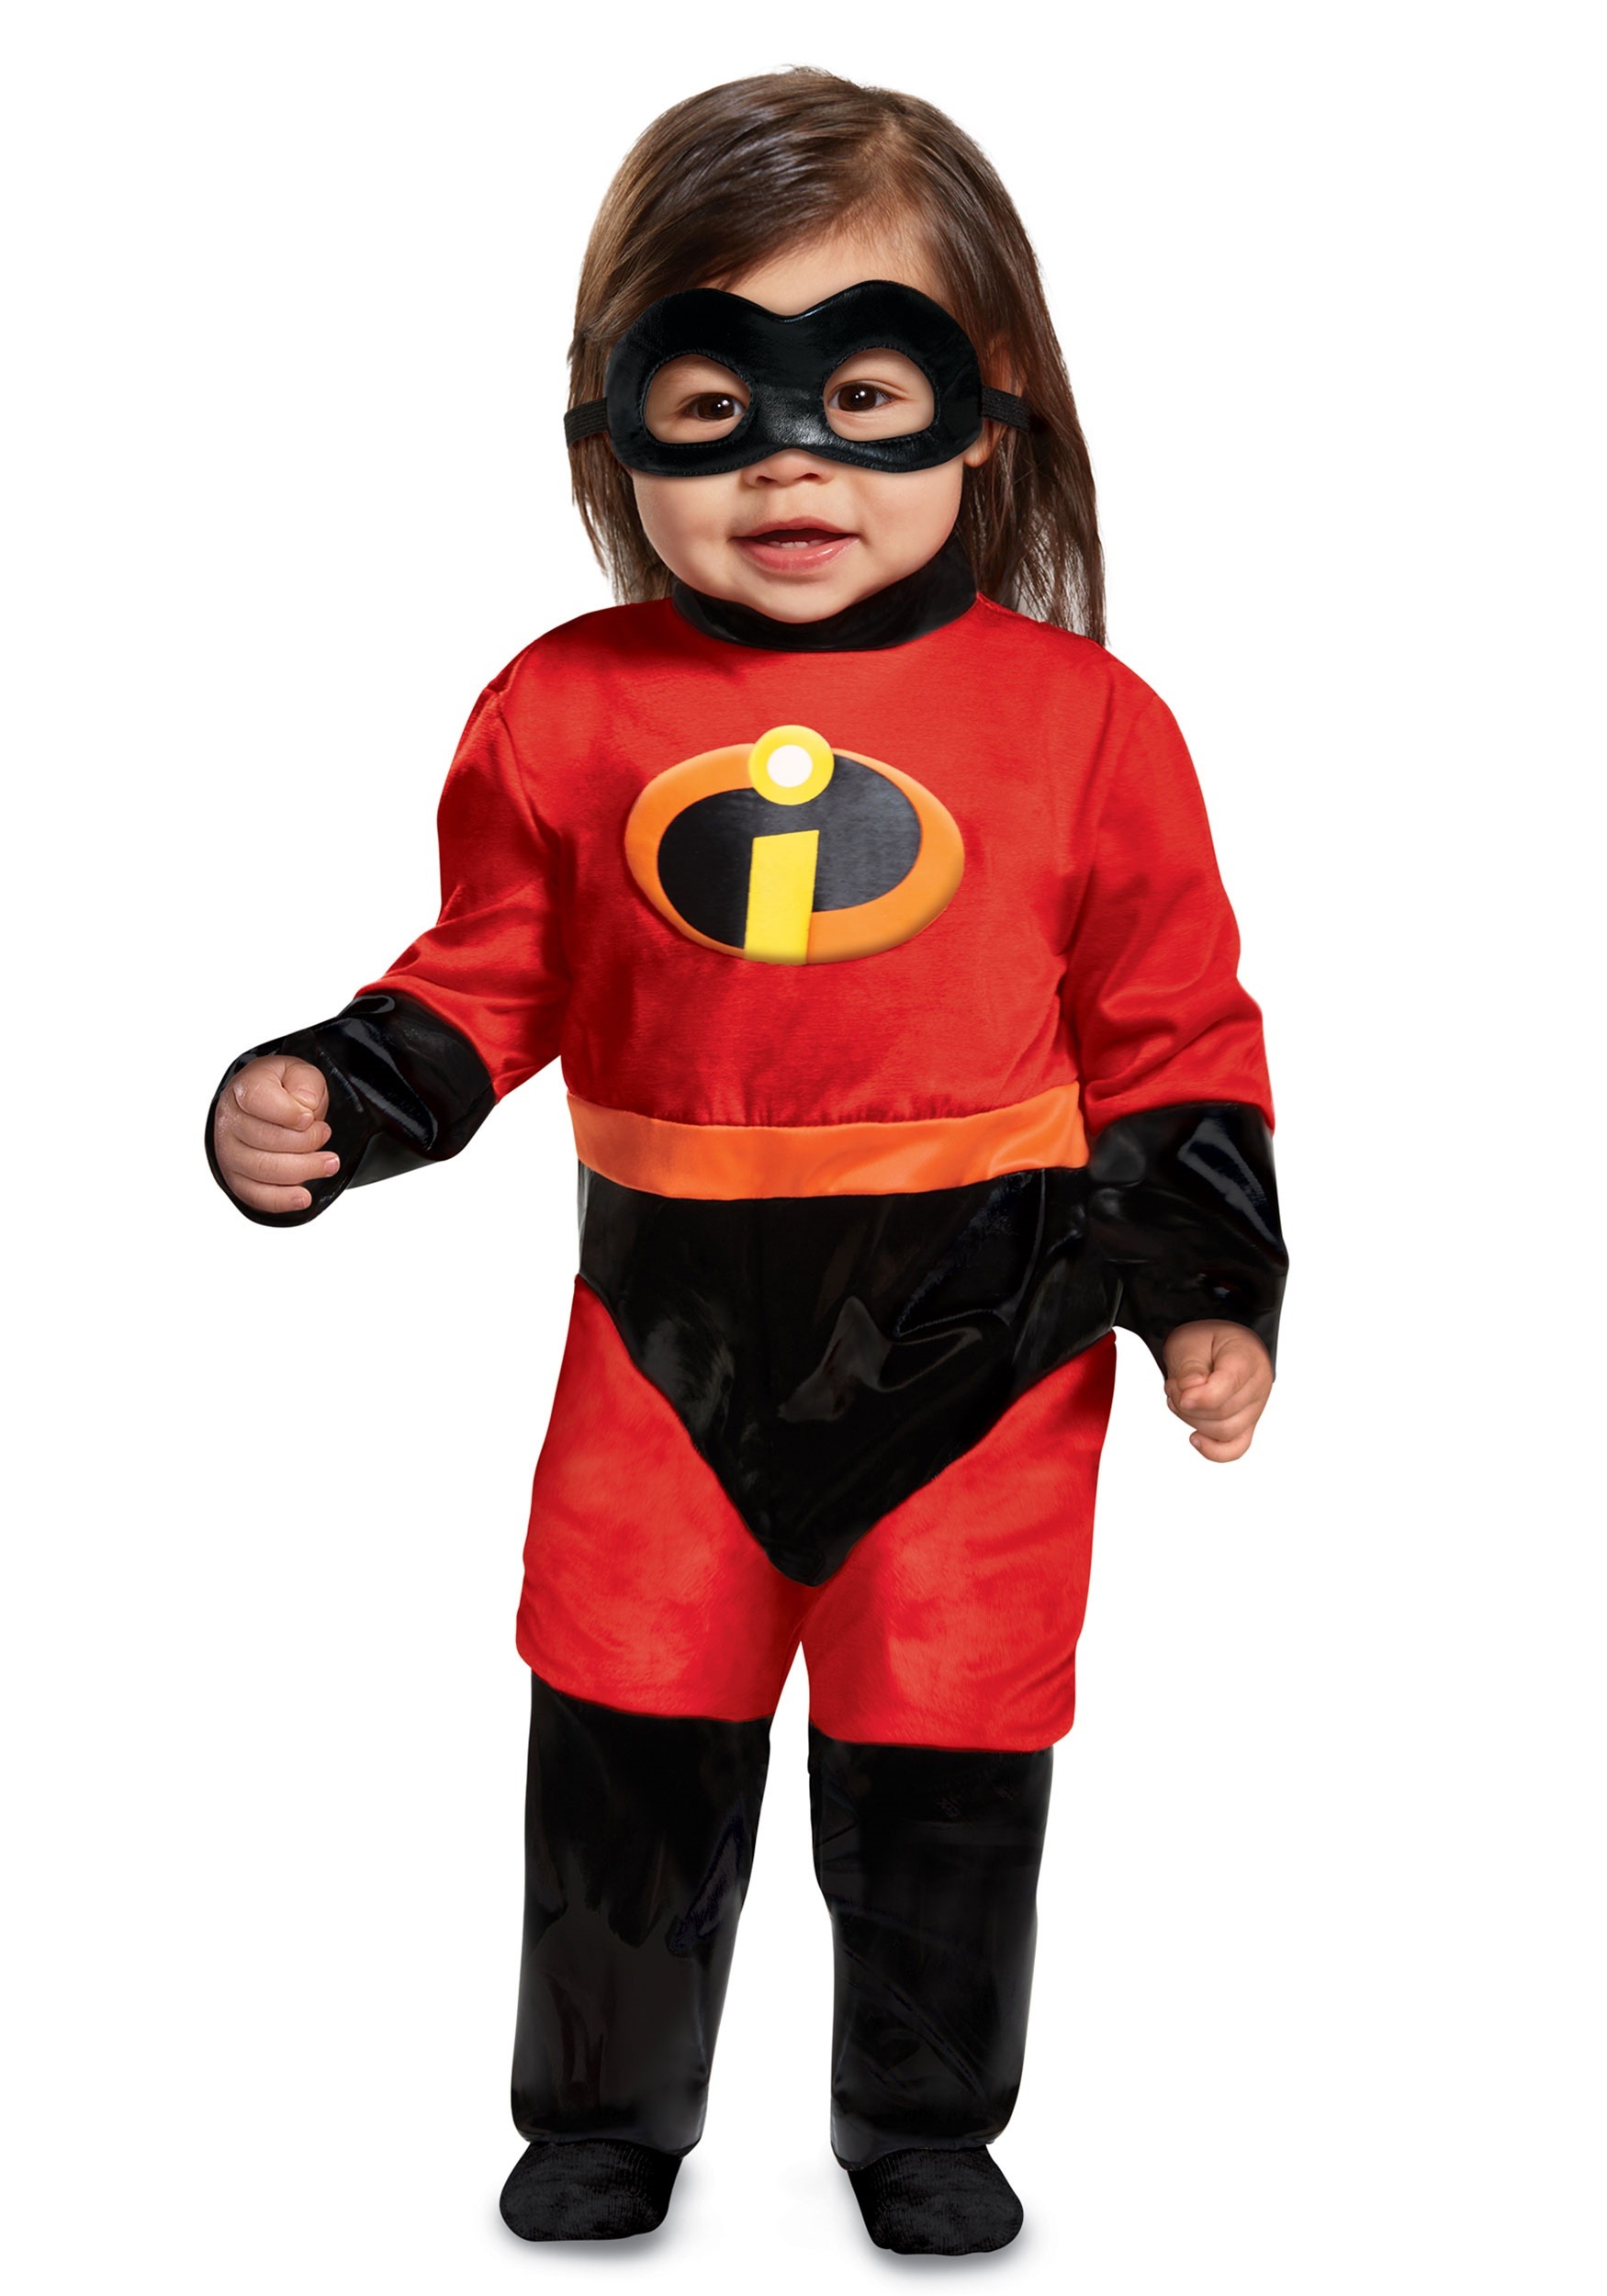 Disney Incredibles 2 Classic Jack Jack Costume for Babies